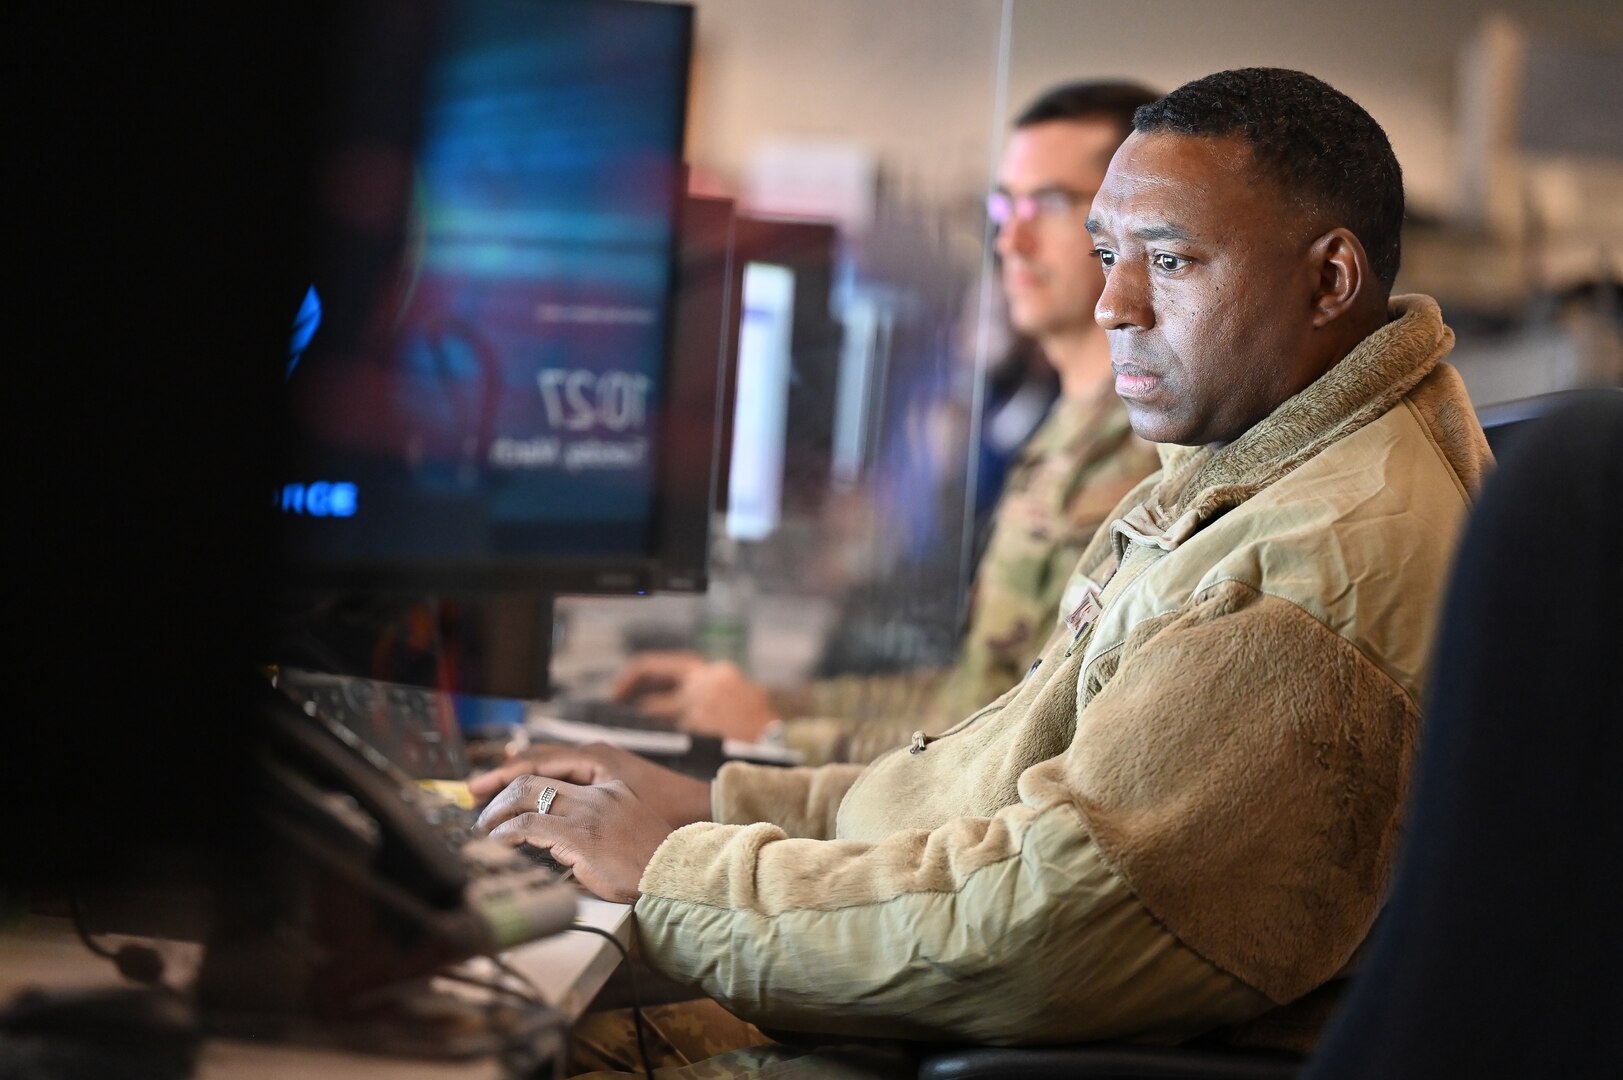 Airman types on a computer during the exercise